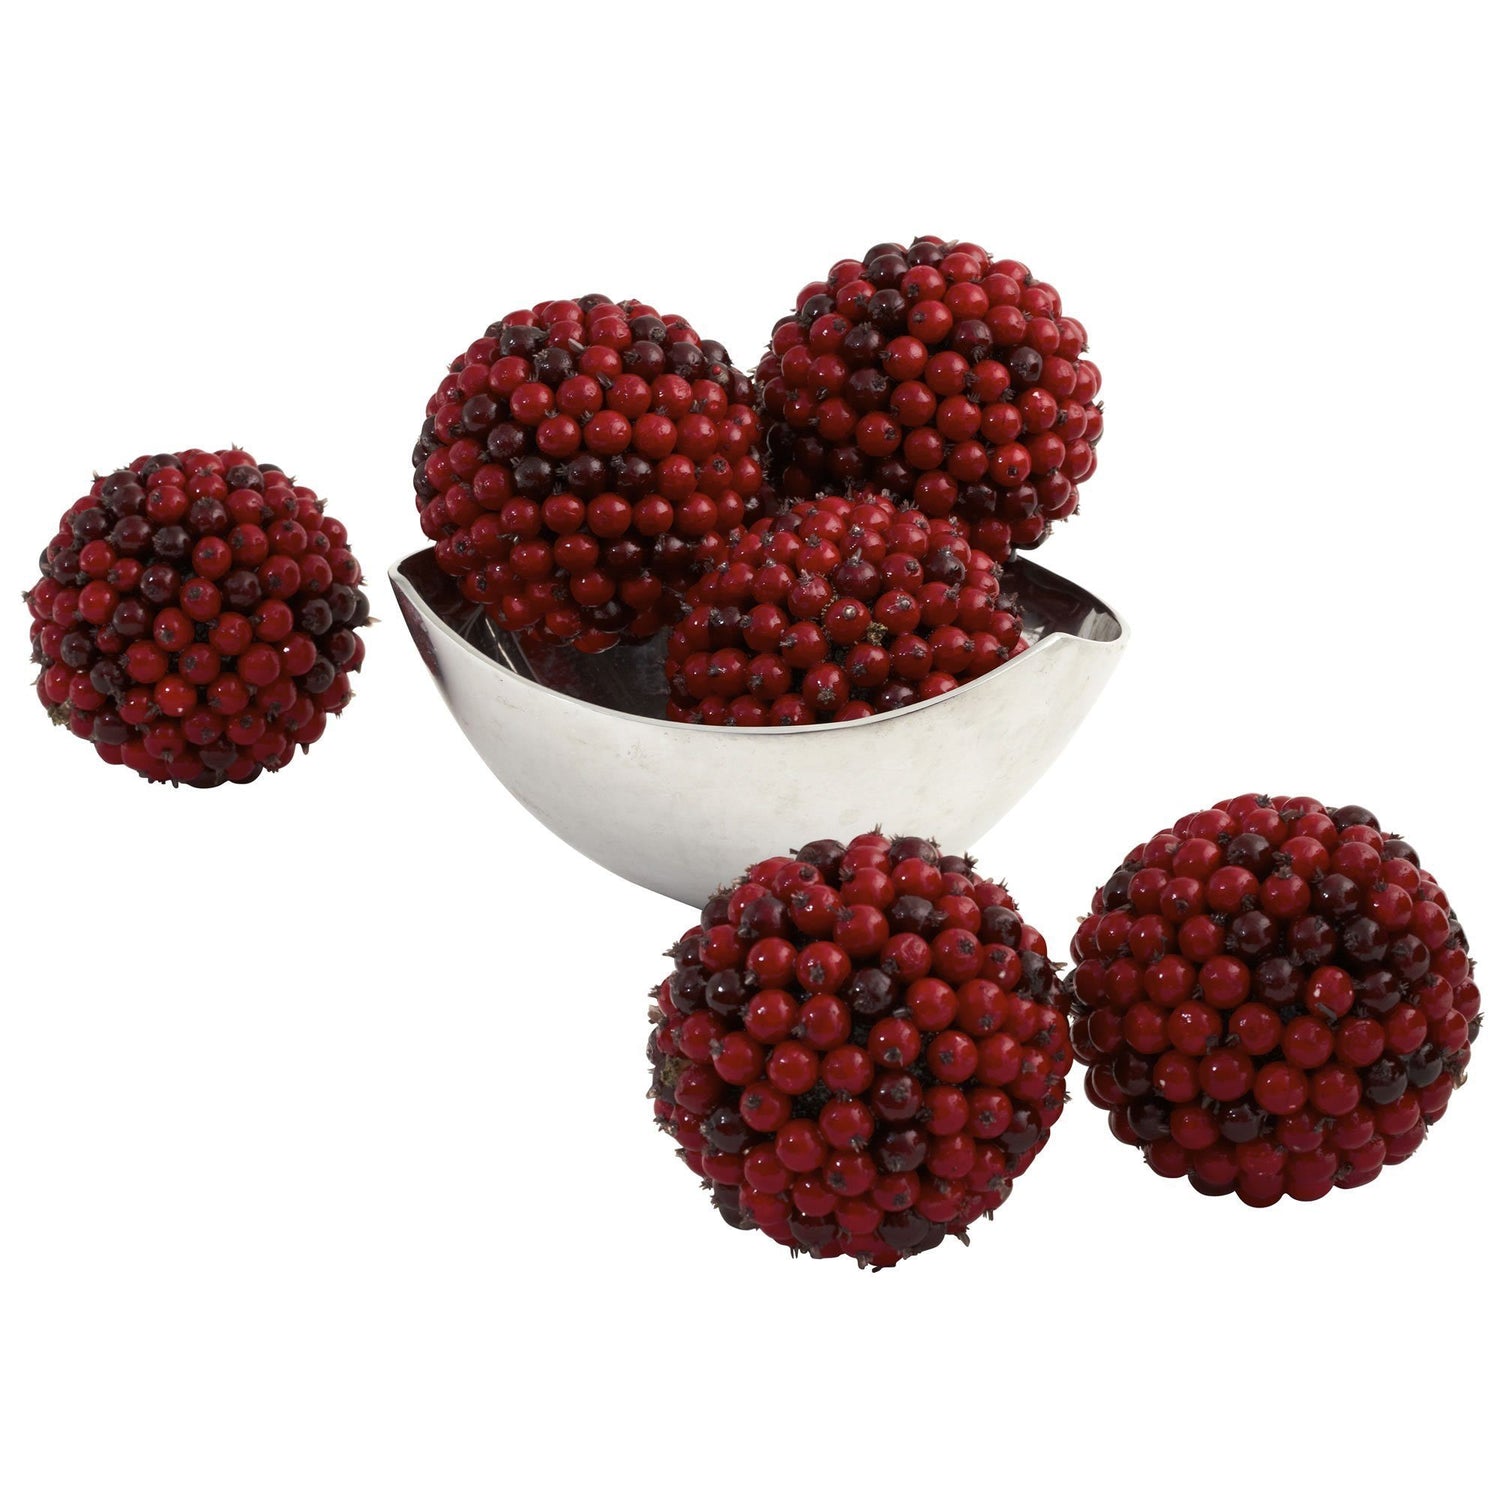 5” Red Berry Ball (Set of 6)